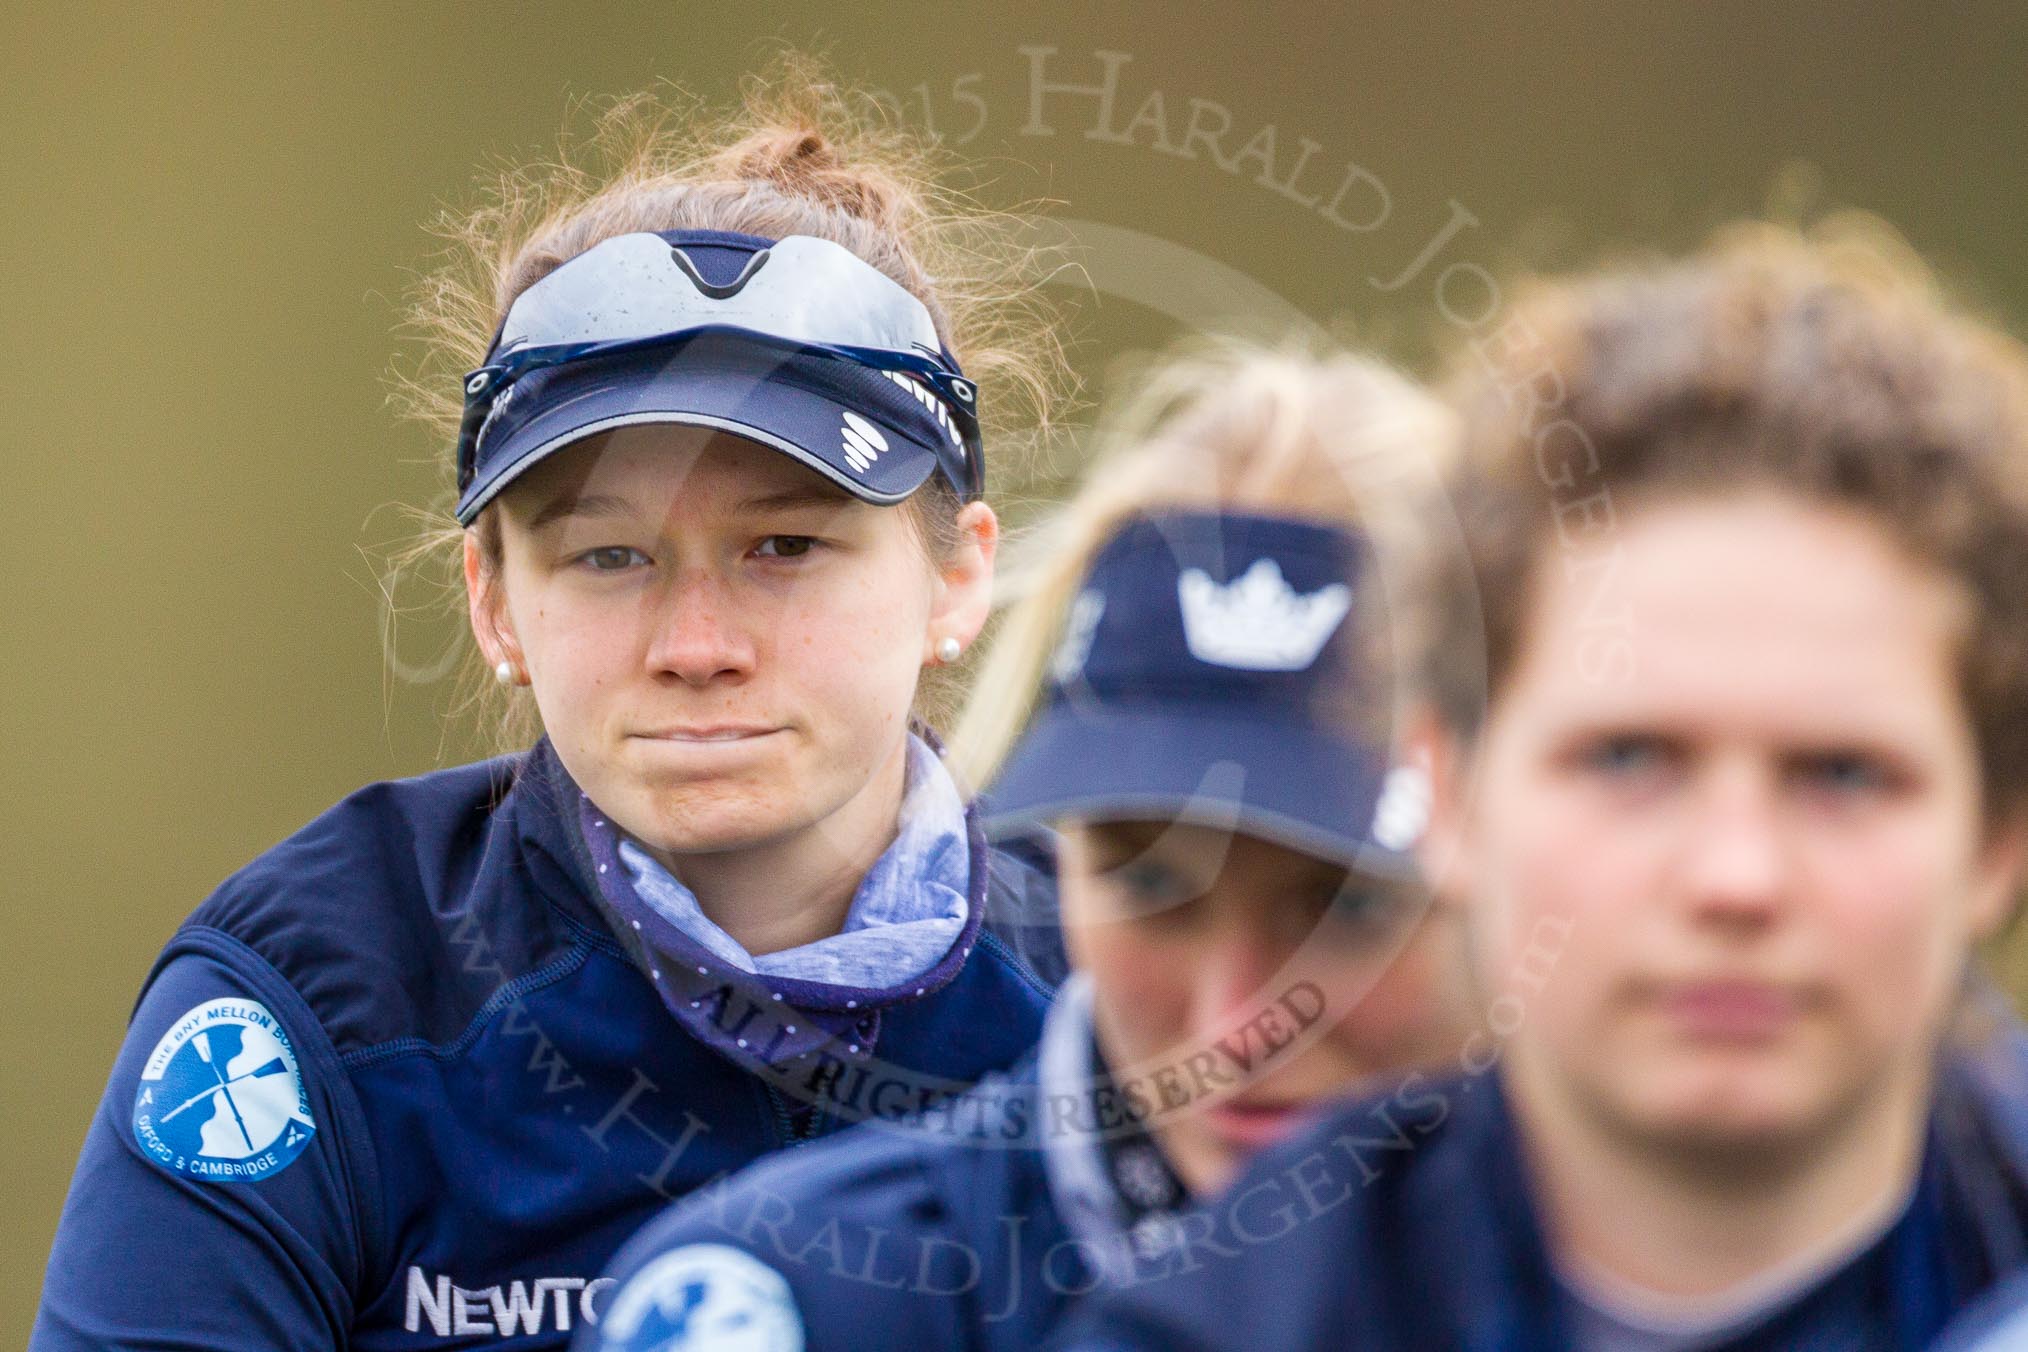 The Boat Race season 2016 - OUWBC training Wallingford: emma Lukasiewicz, bow in the OUWBC Blue Boat.
River Thames,
Wallingford,
Oxfordshire,

on 29 February 2016 at 15:48, image #58